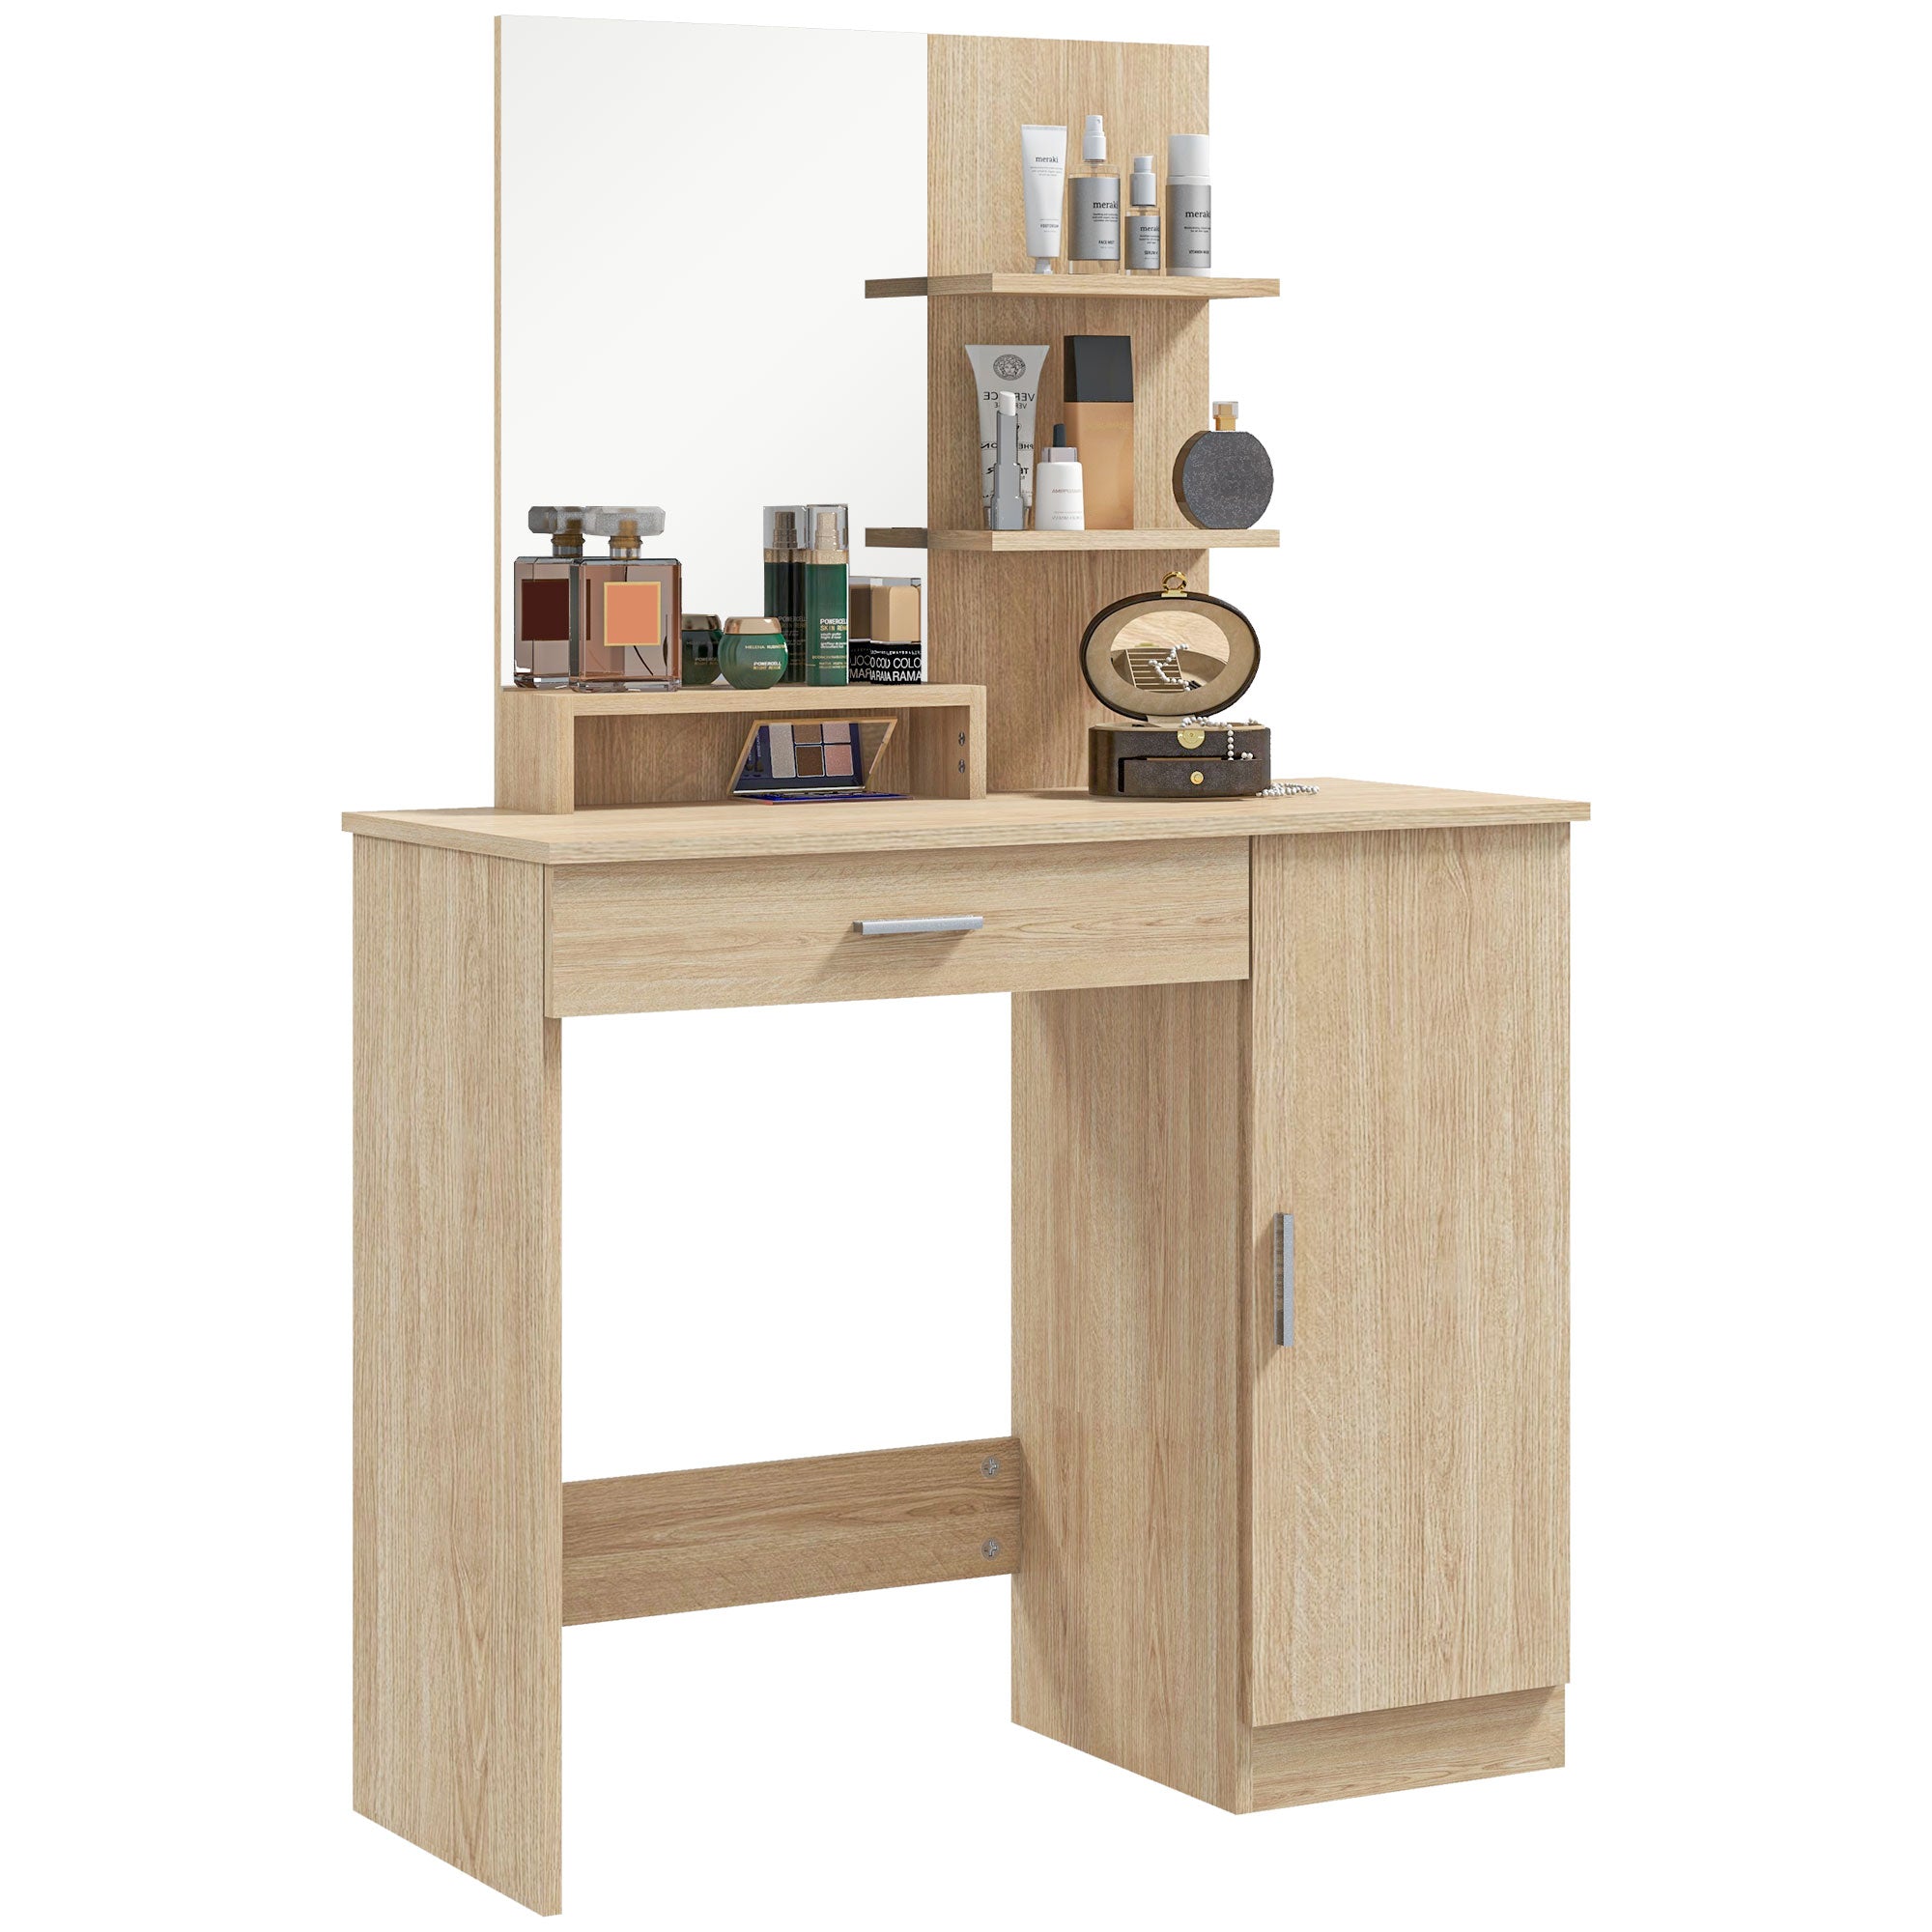 Dressing Table, Vanity Table with Mirror, Drawer and Storage Shelves for Bedroom, 35.4